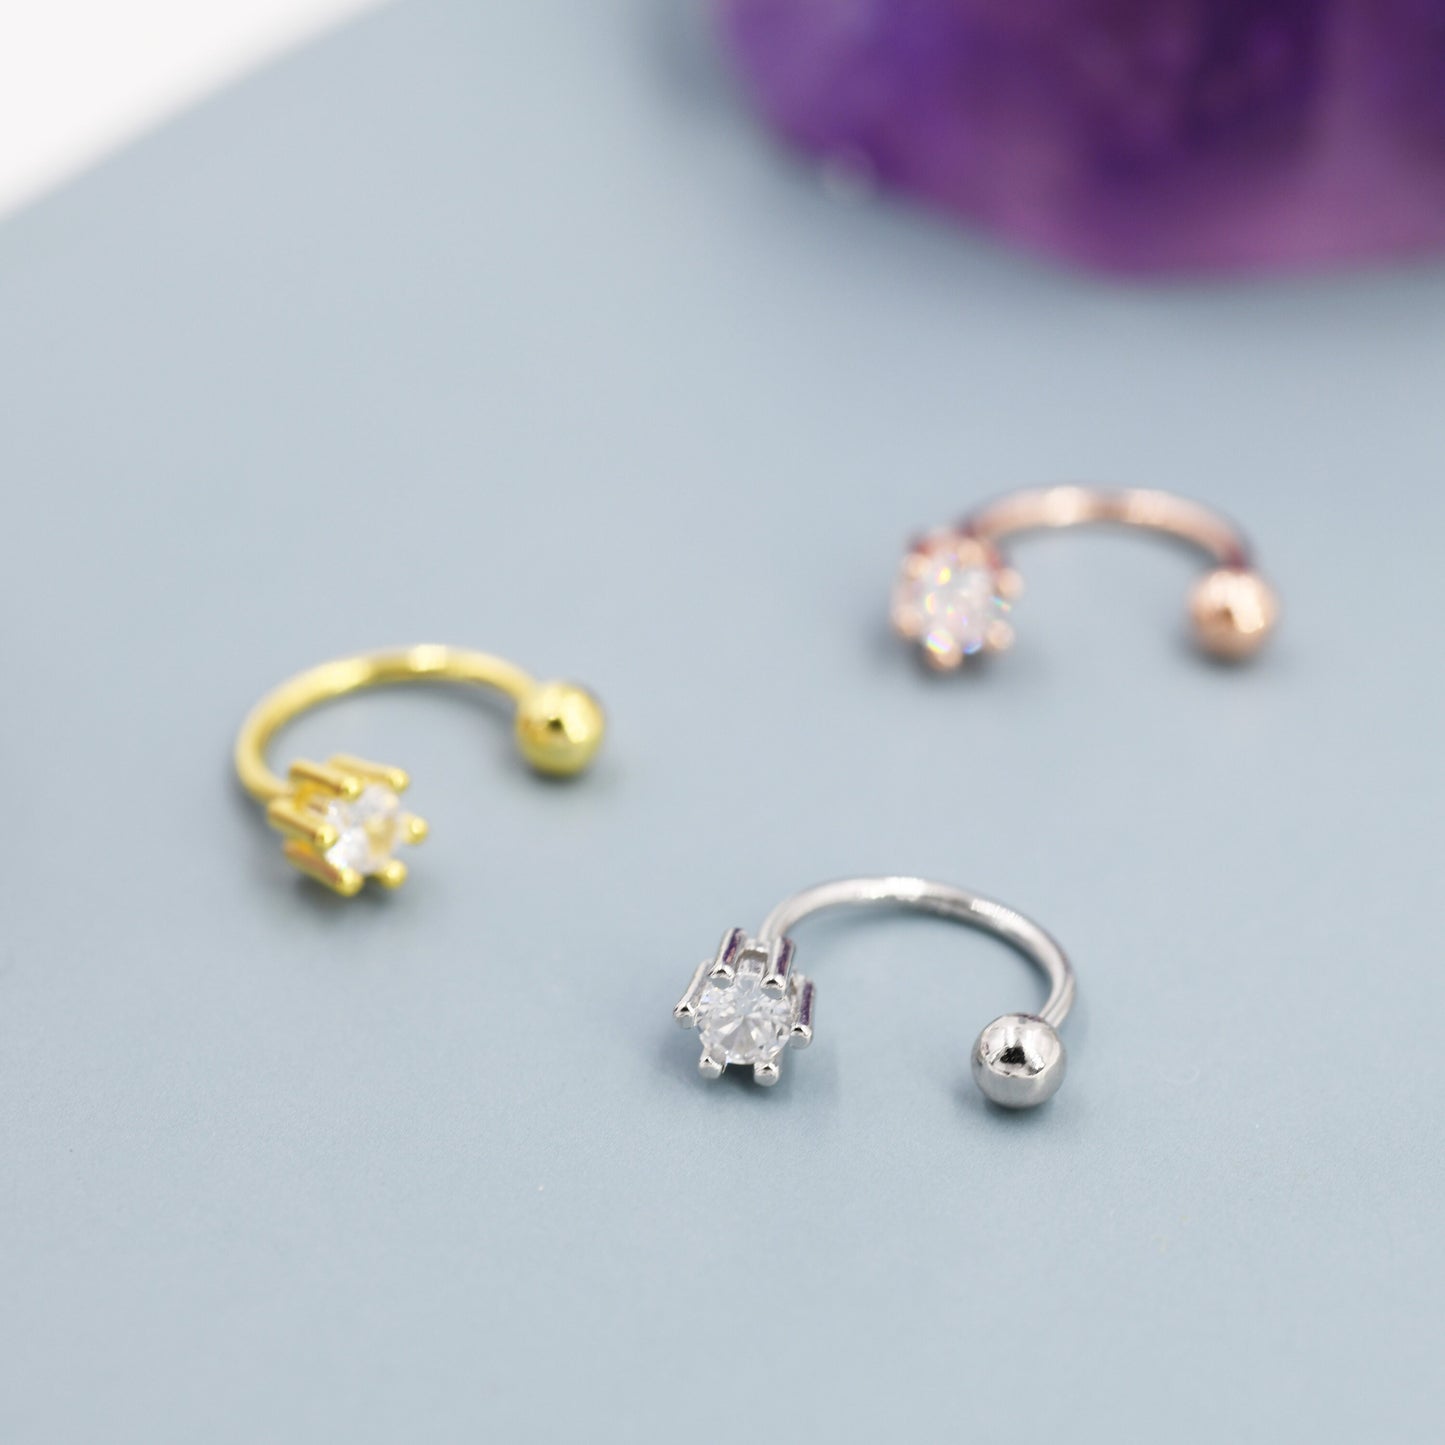 Huggie Hoop Earrings (2pc) with Screw Back in Sterling Silver, Sparkly CZ Crystals (Lab Diamond), Curved Barbell Earrings